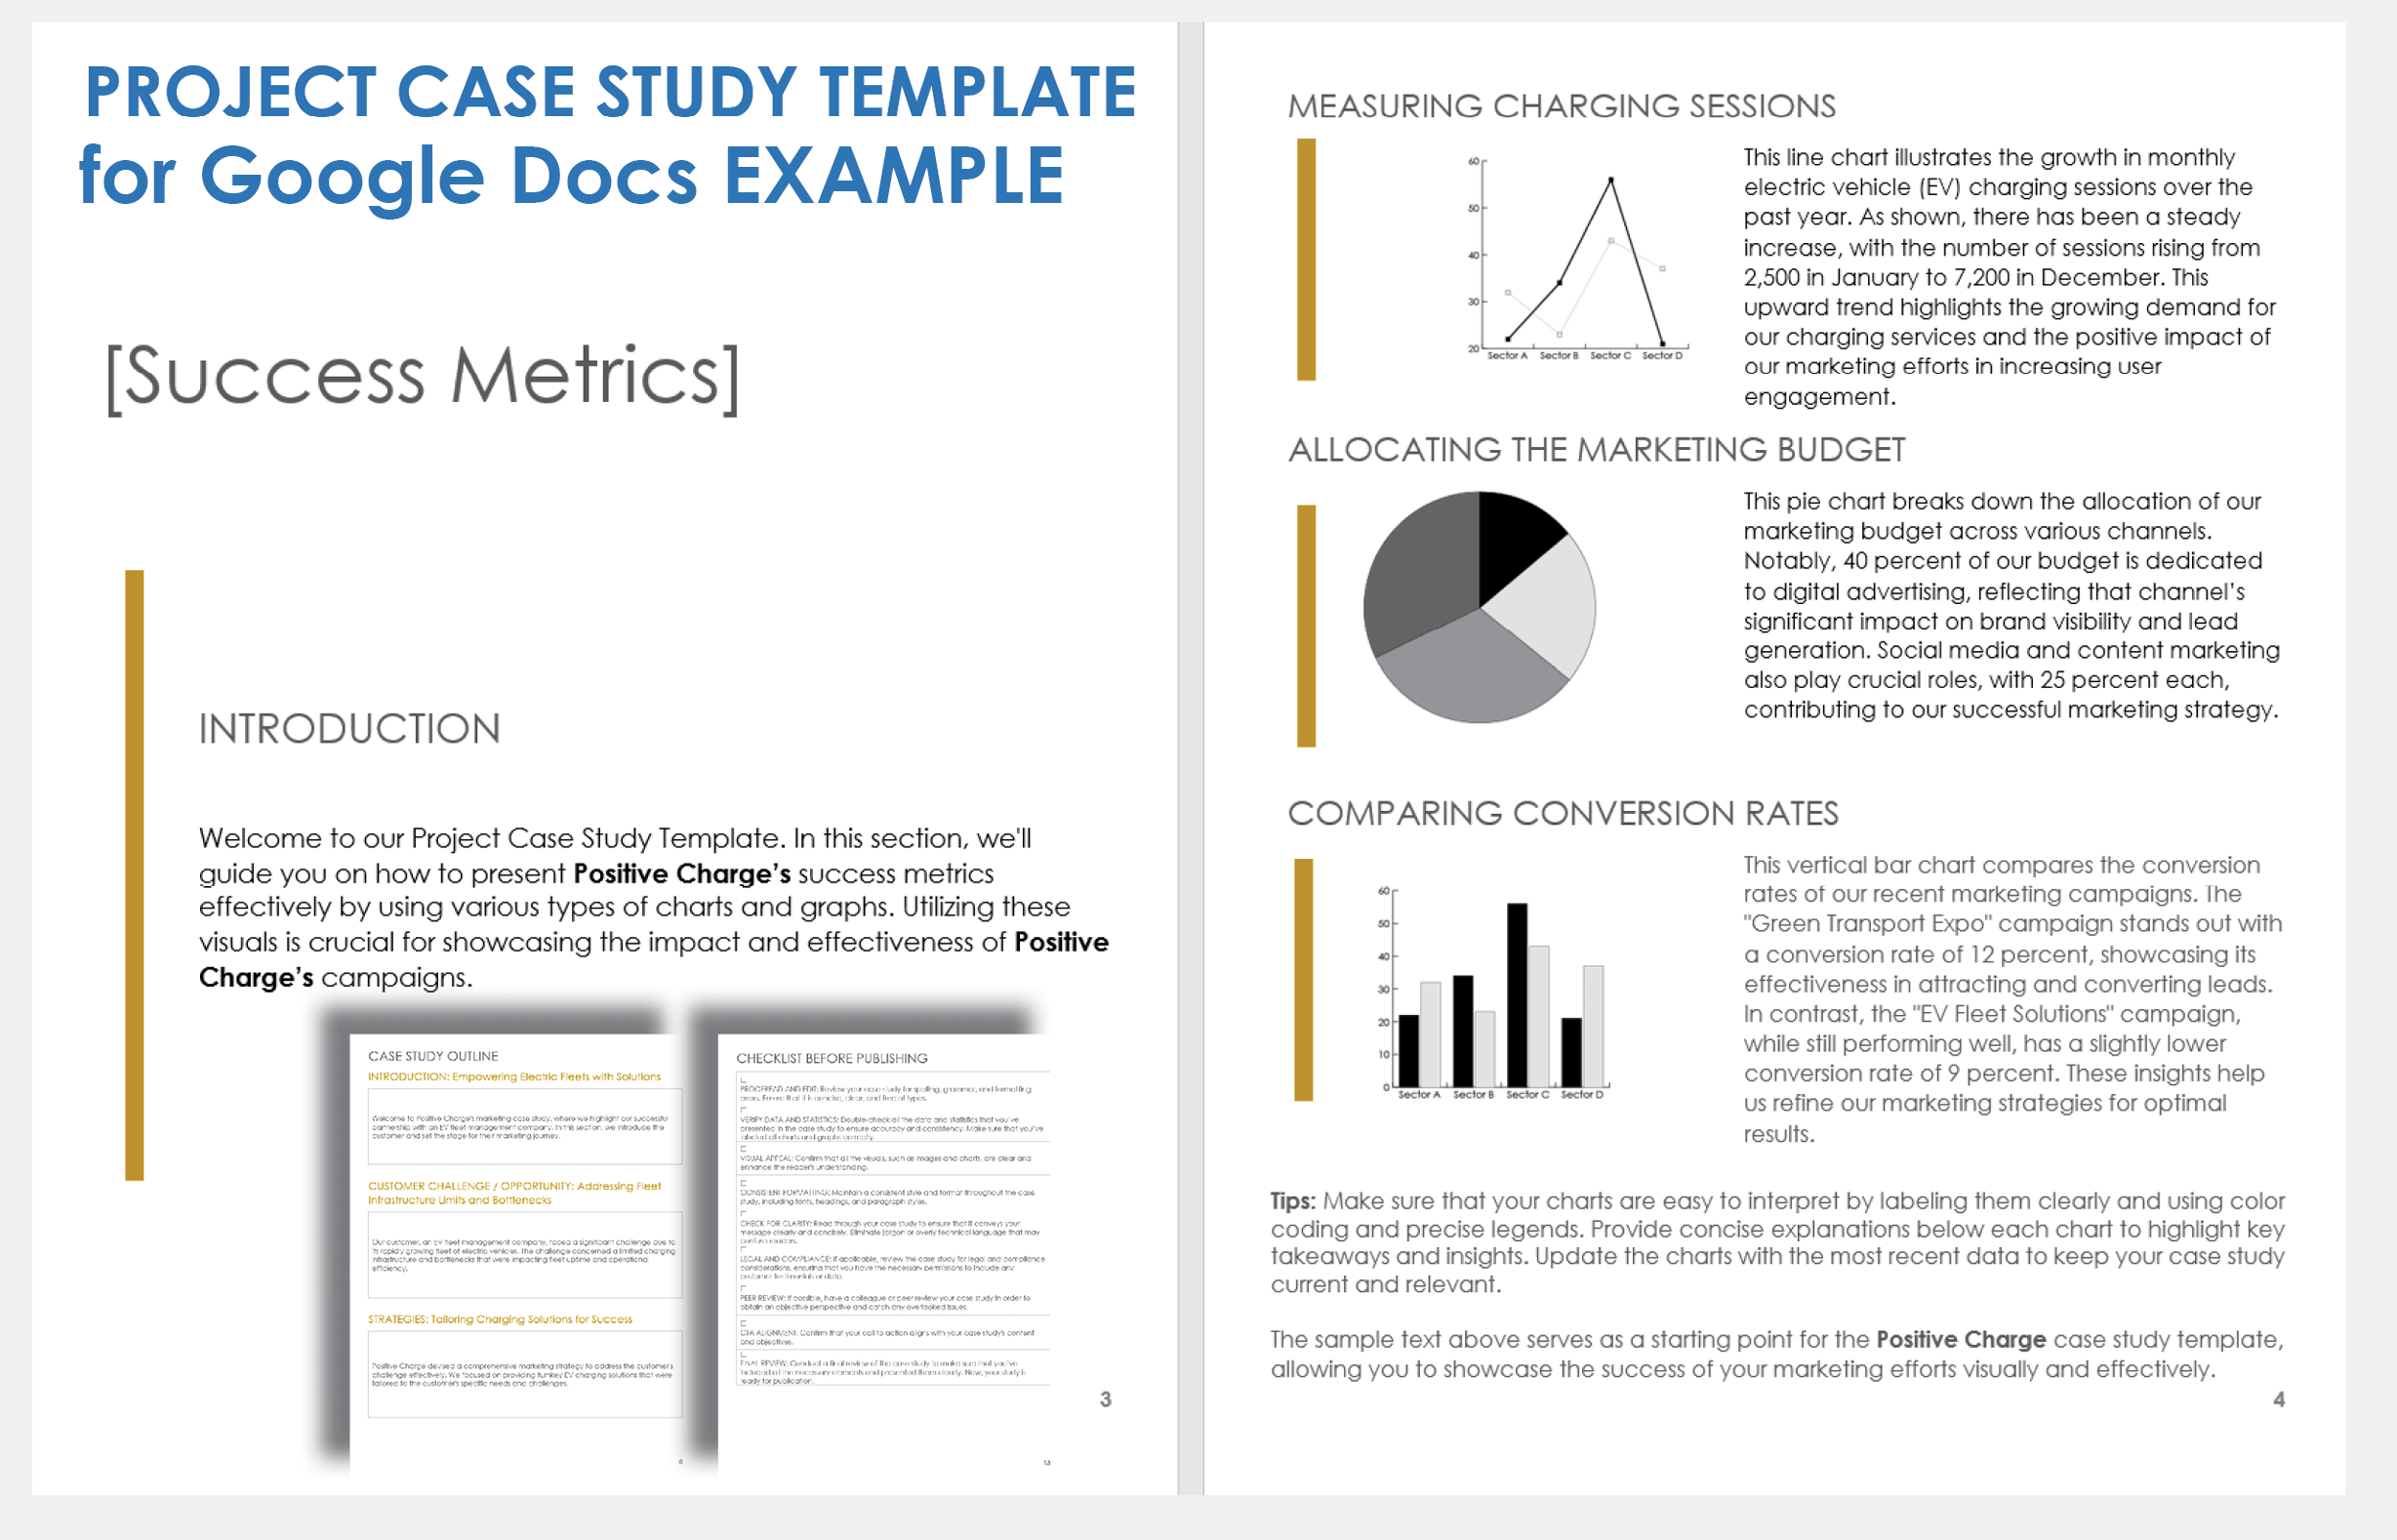 Project Case Study Example Template Google Docs